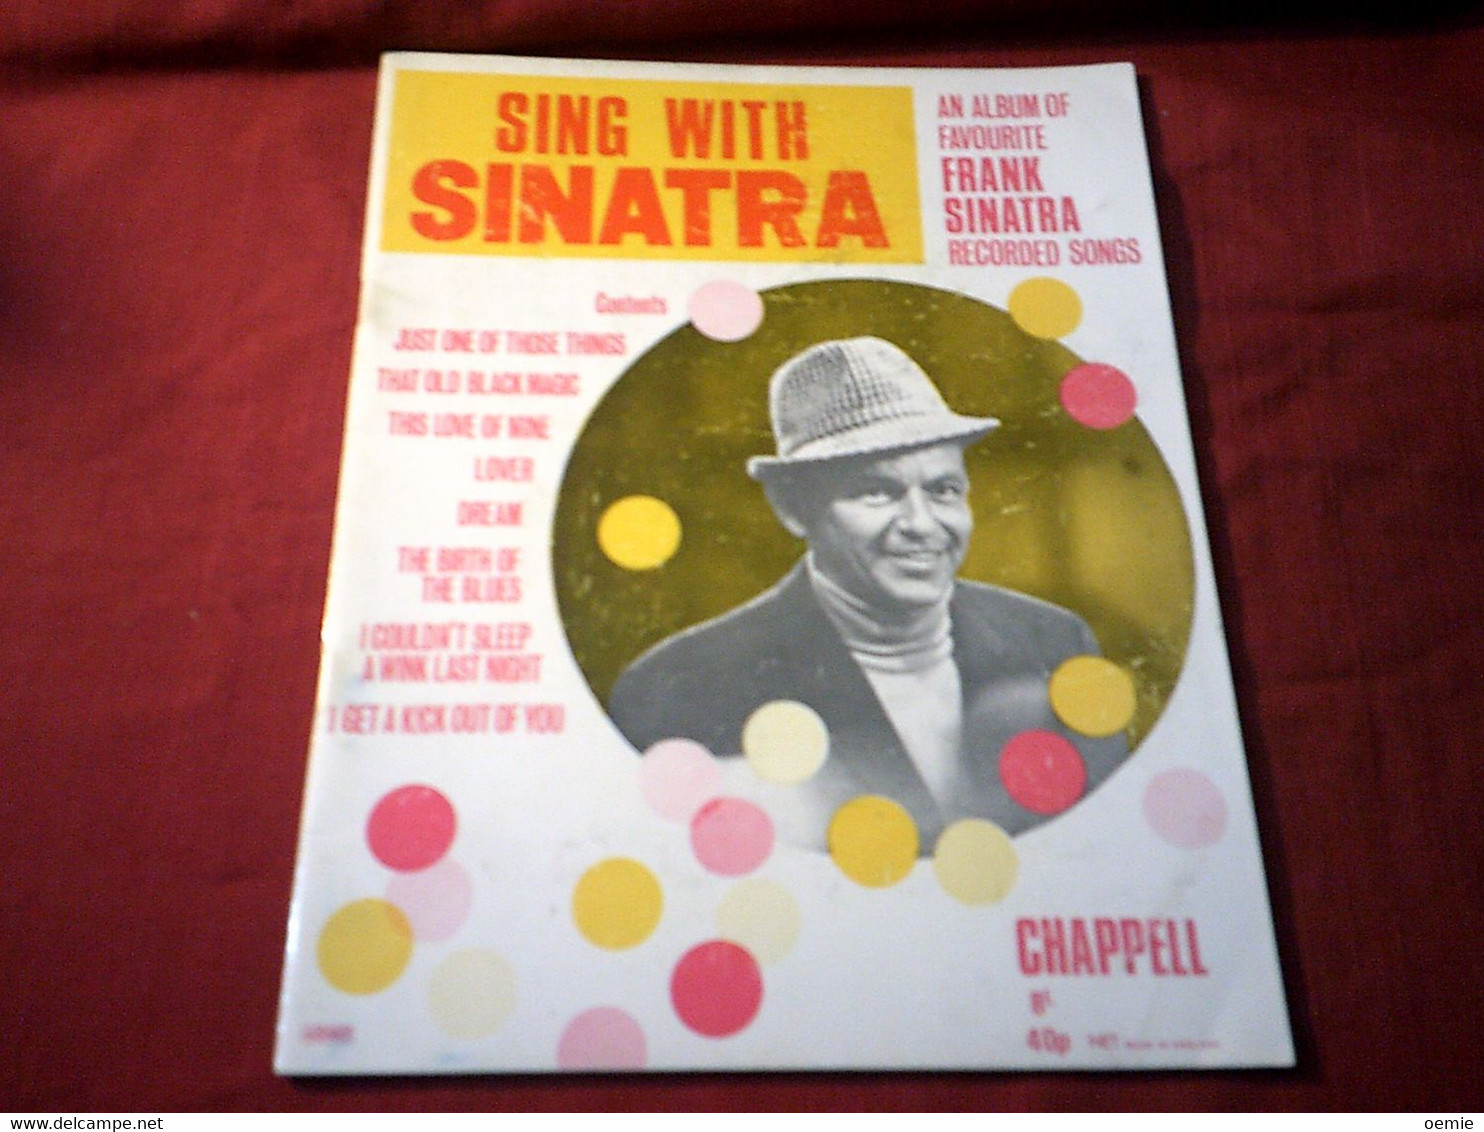 SING WHIT SINATRA     / AND ALBUM OF FAVORITE FRANK SINATRA RECORDED SONGS // CHAPPELL MADE IN ANGLAND - Cultural